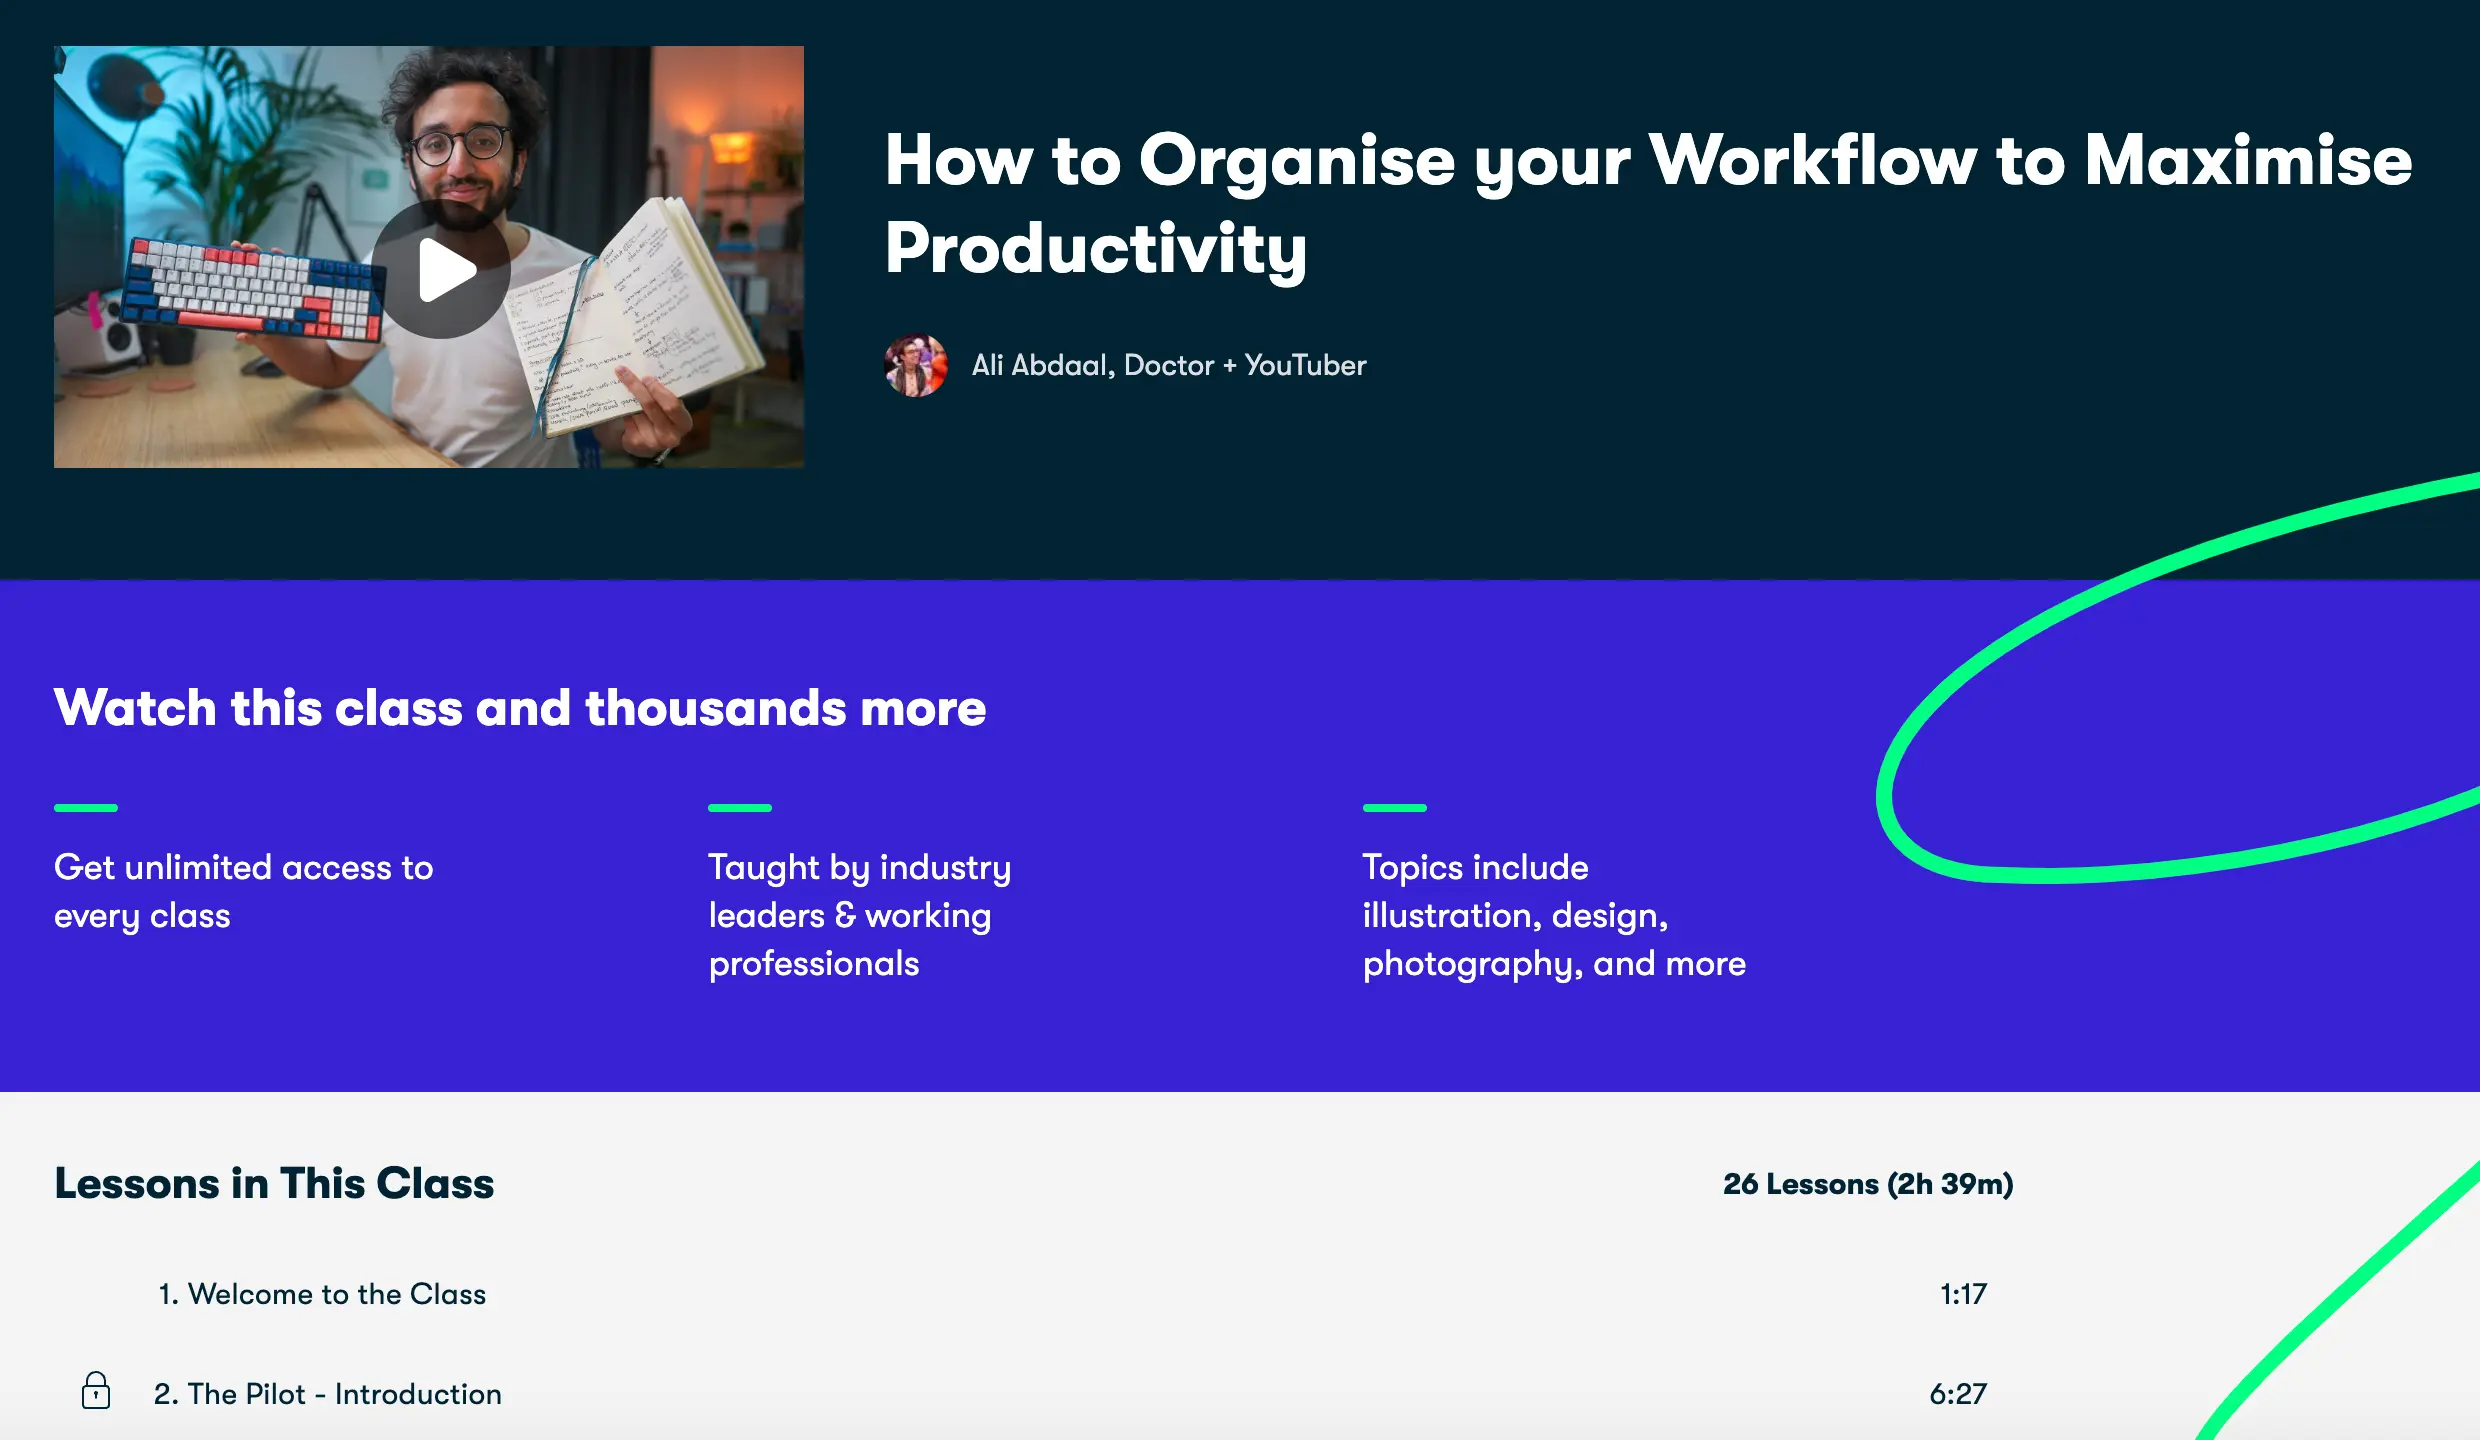 How to Organise your Workflow to Maximise Productivity